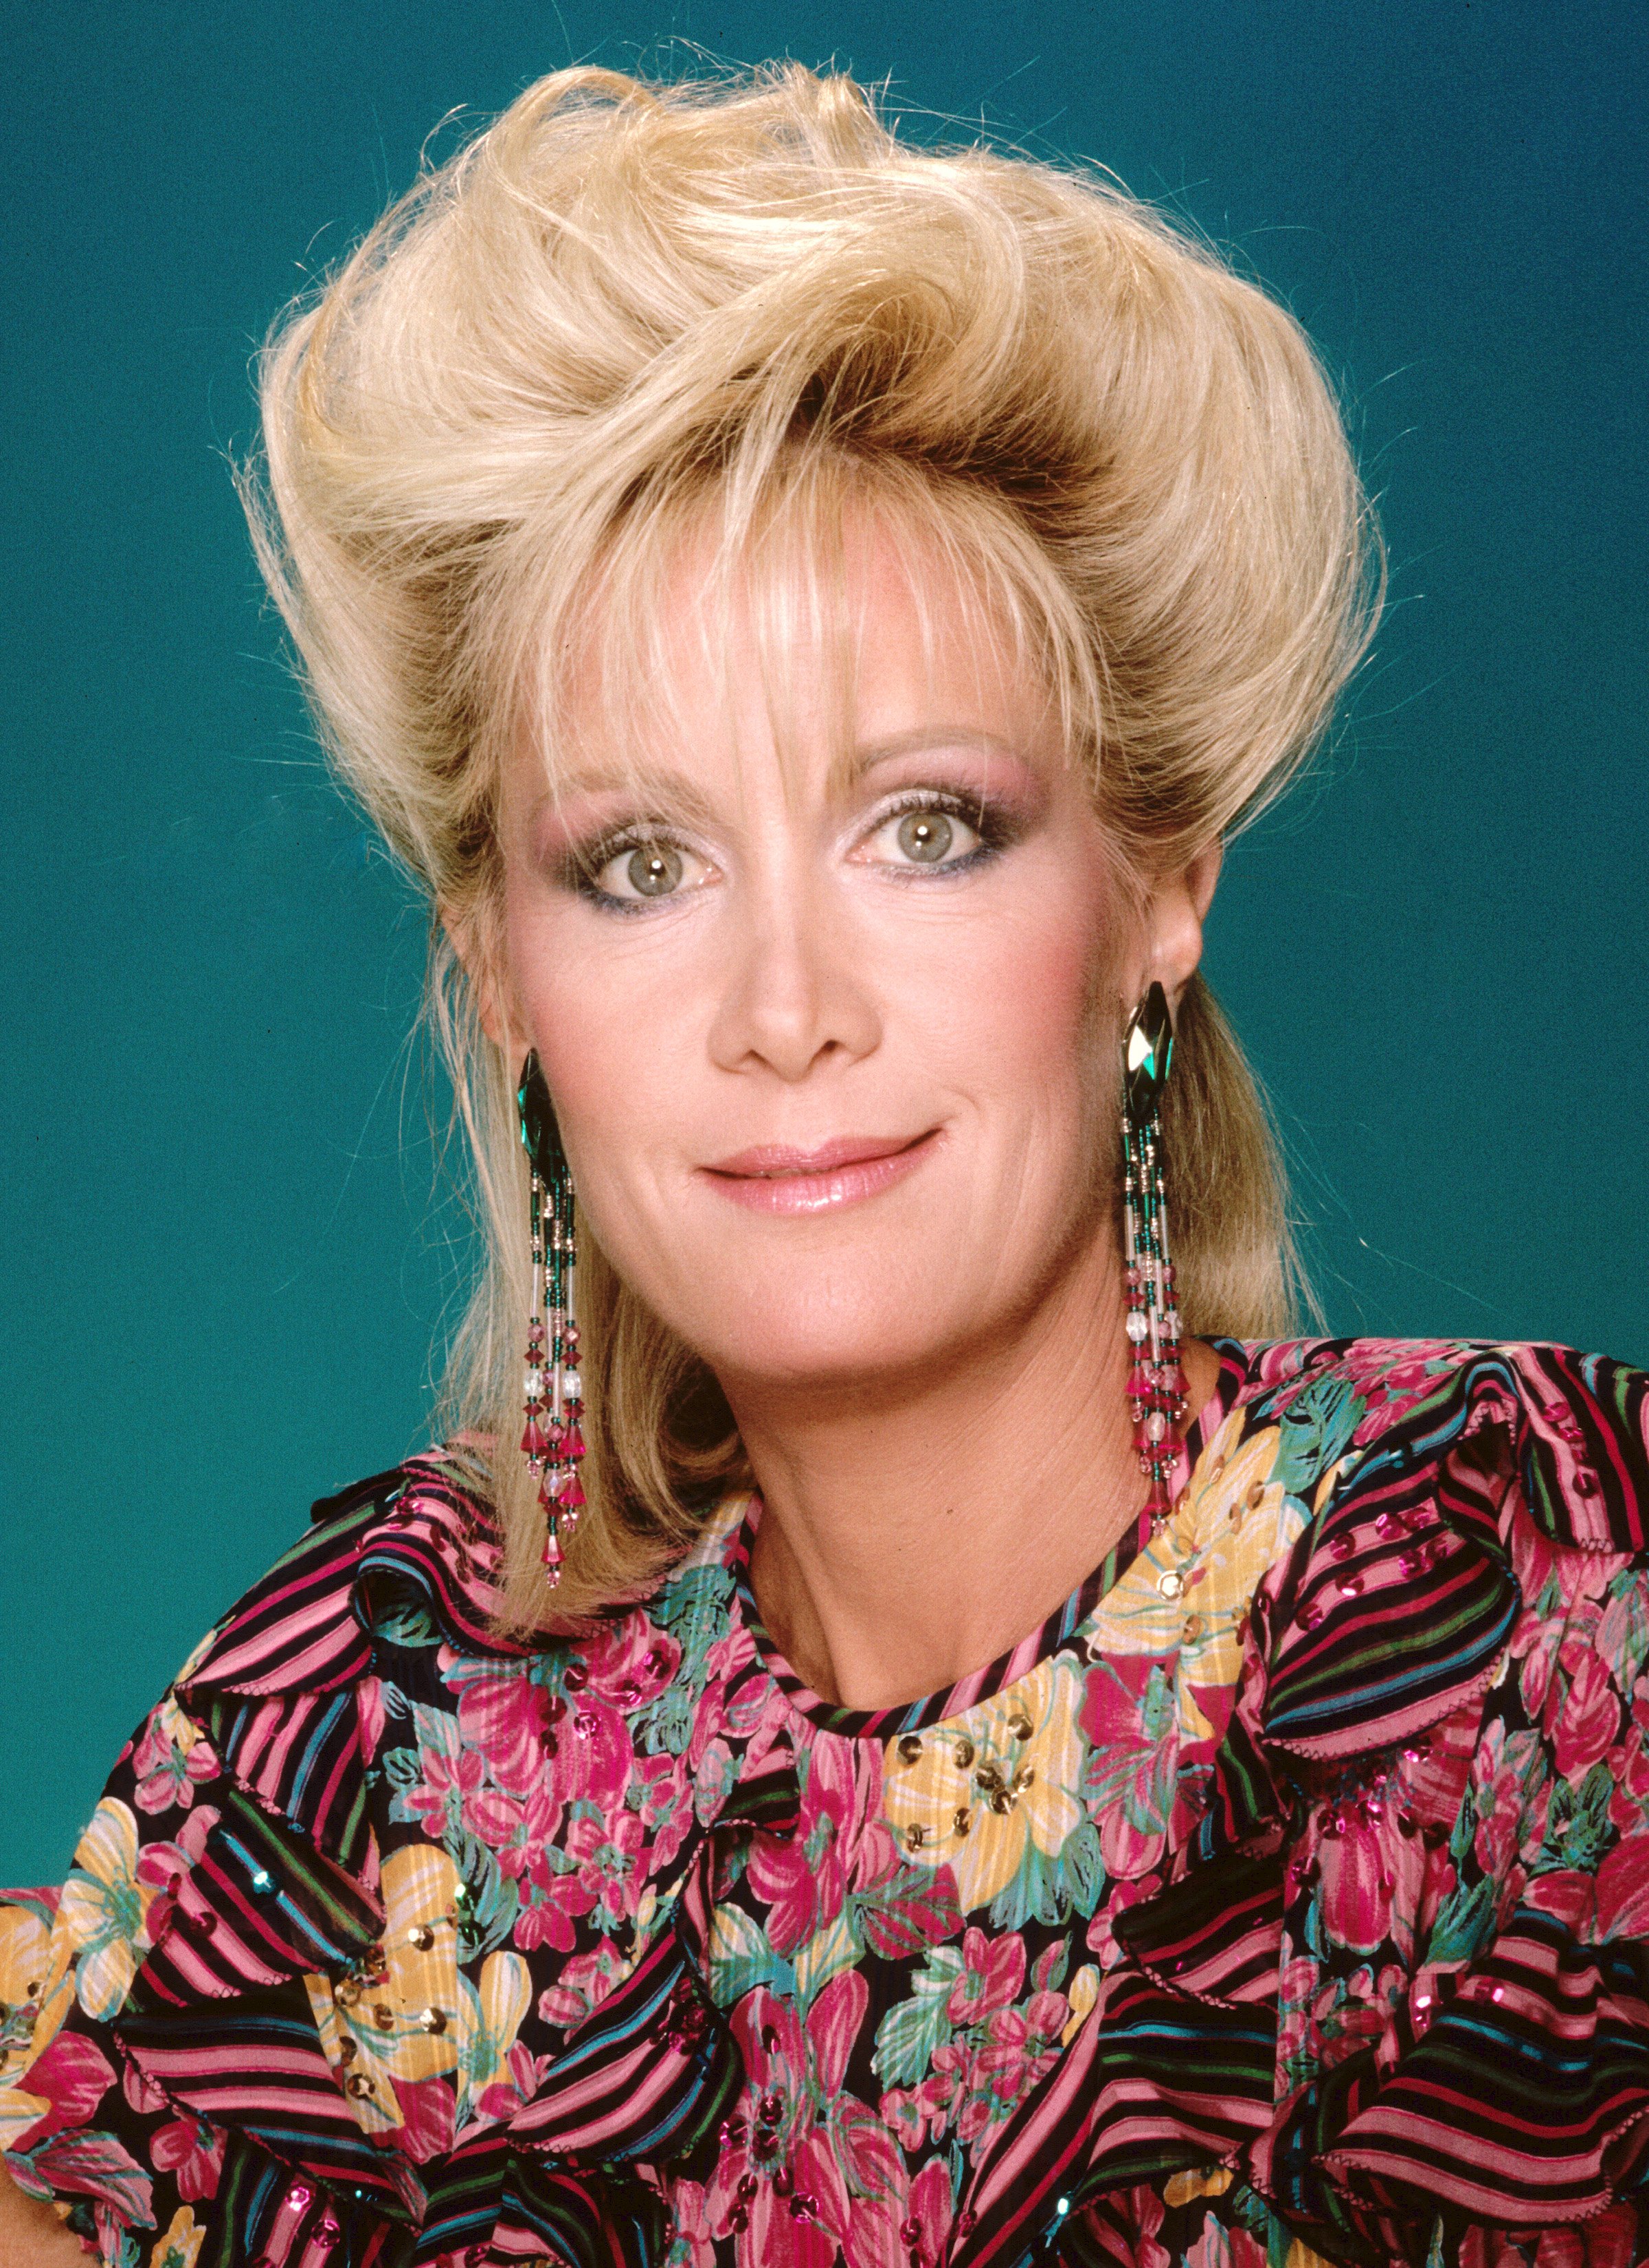 Joan Van Ark poses for a portrait on January 1, 1986 in Los Angeles, California. | Source: Getty Images